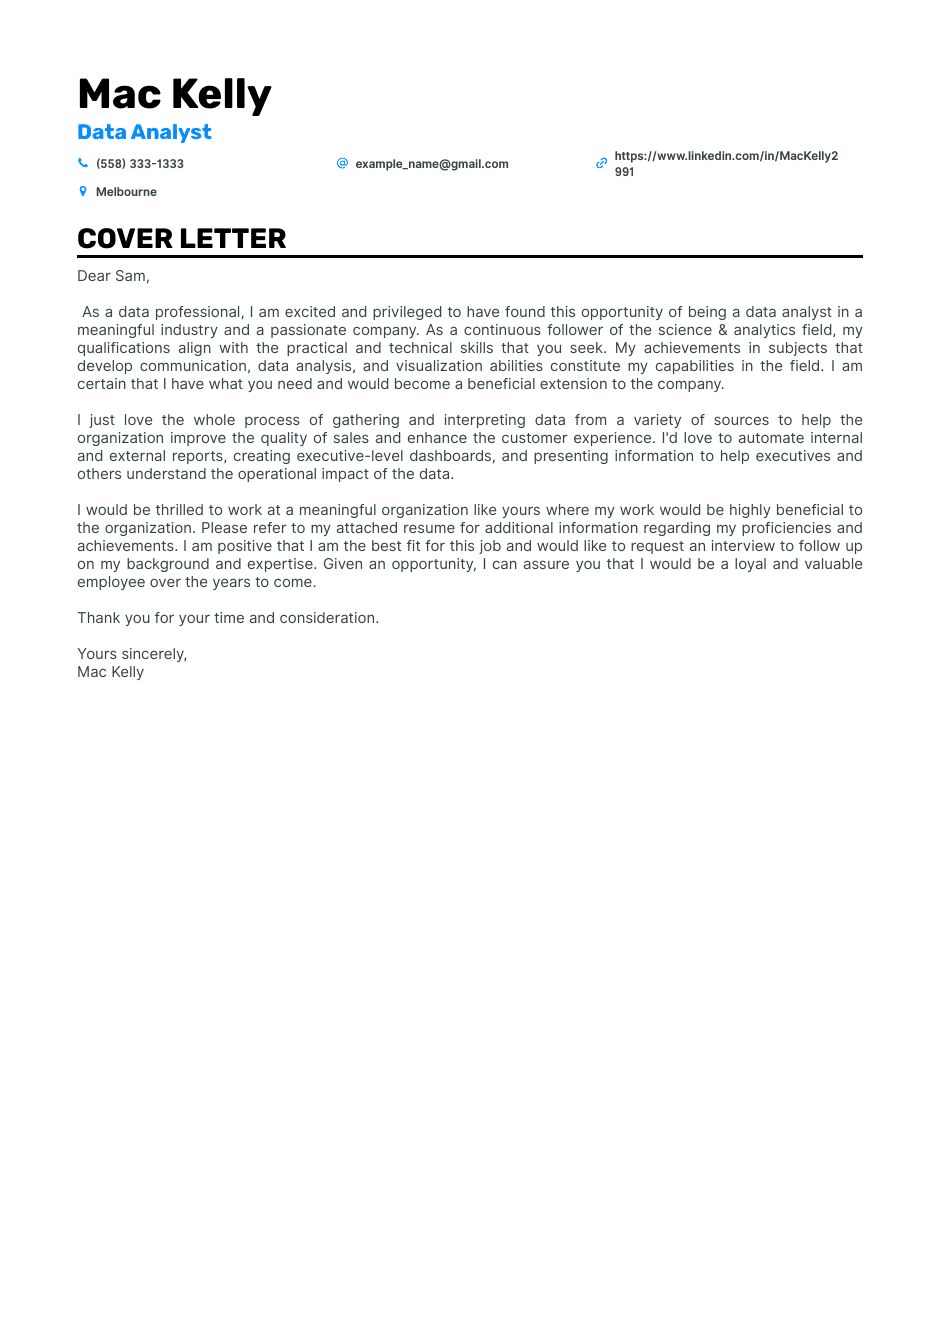 data-analyst-coverletter.png